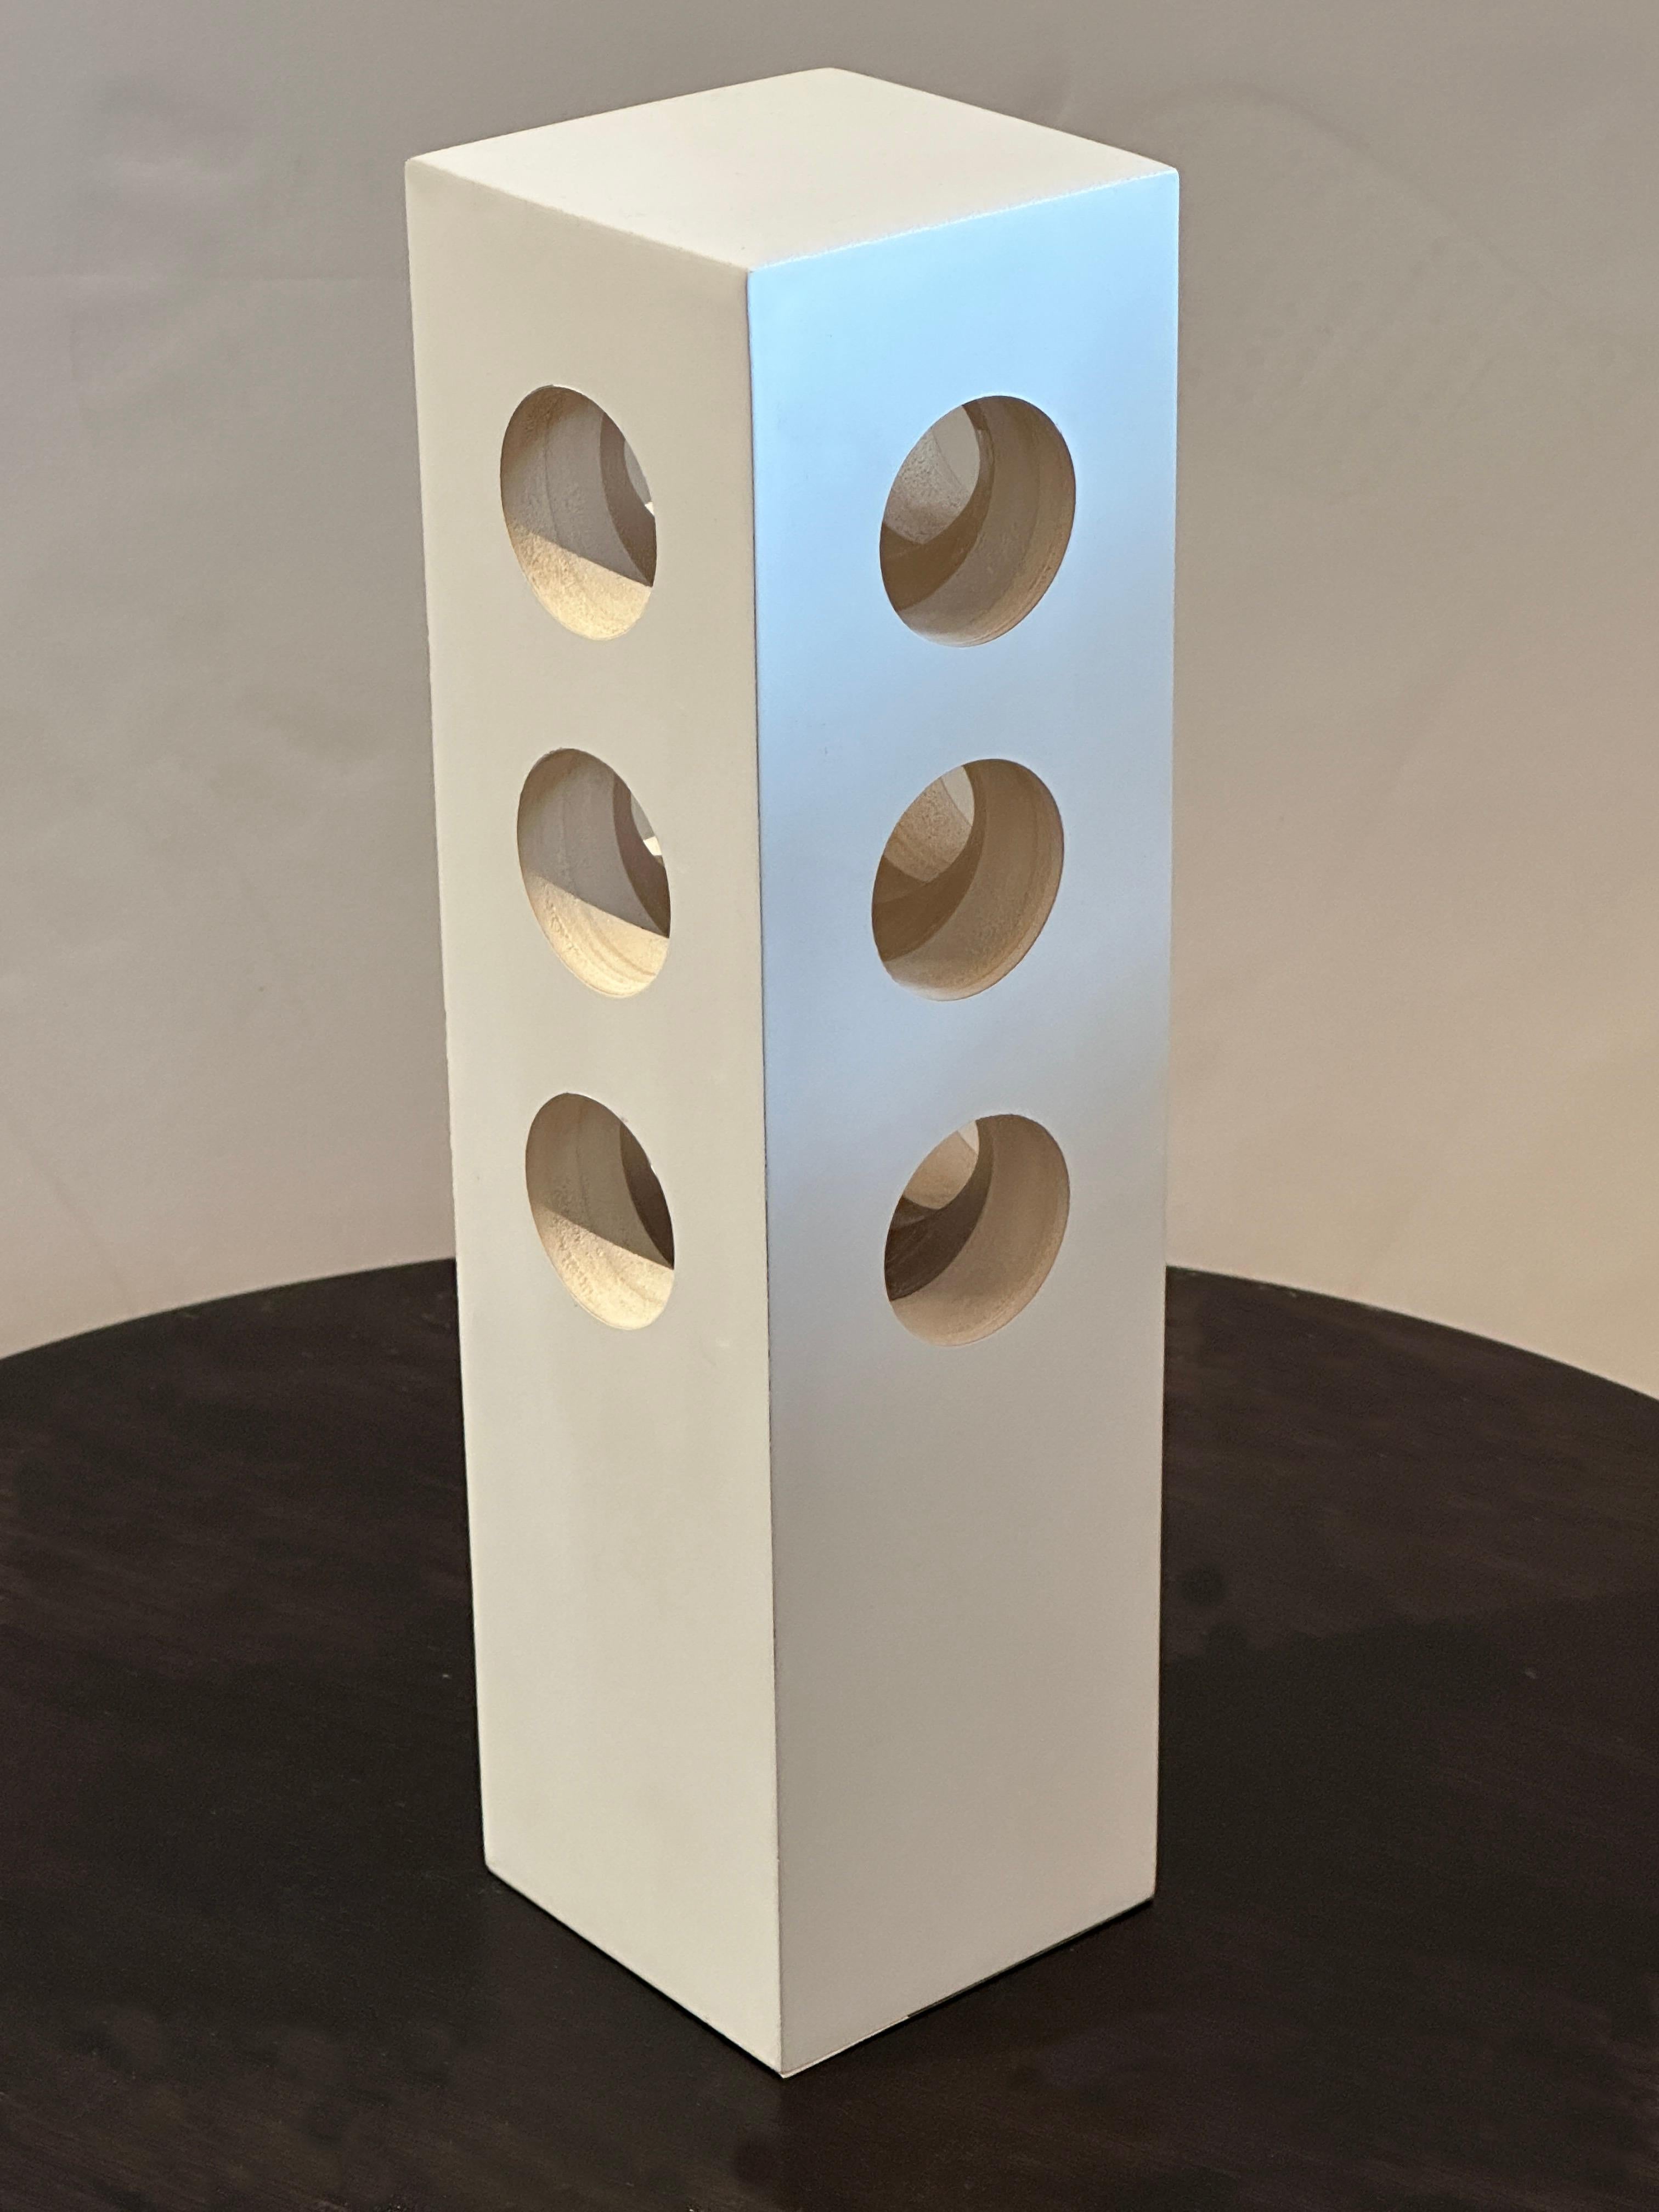 This modern Minimalist white table lamp features three regular holes on each side, allowing soft and calming light to pass through. The lacquered white wood finish ensures that it blends seamlessly with any color scheme. This table lamp will